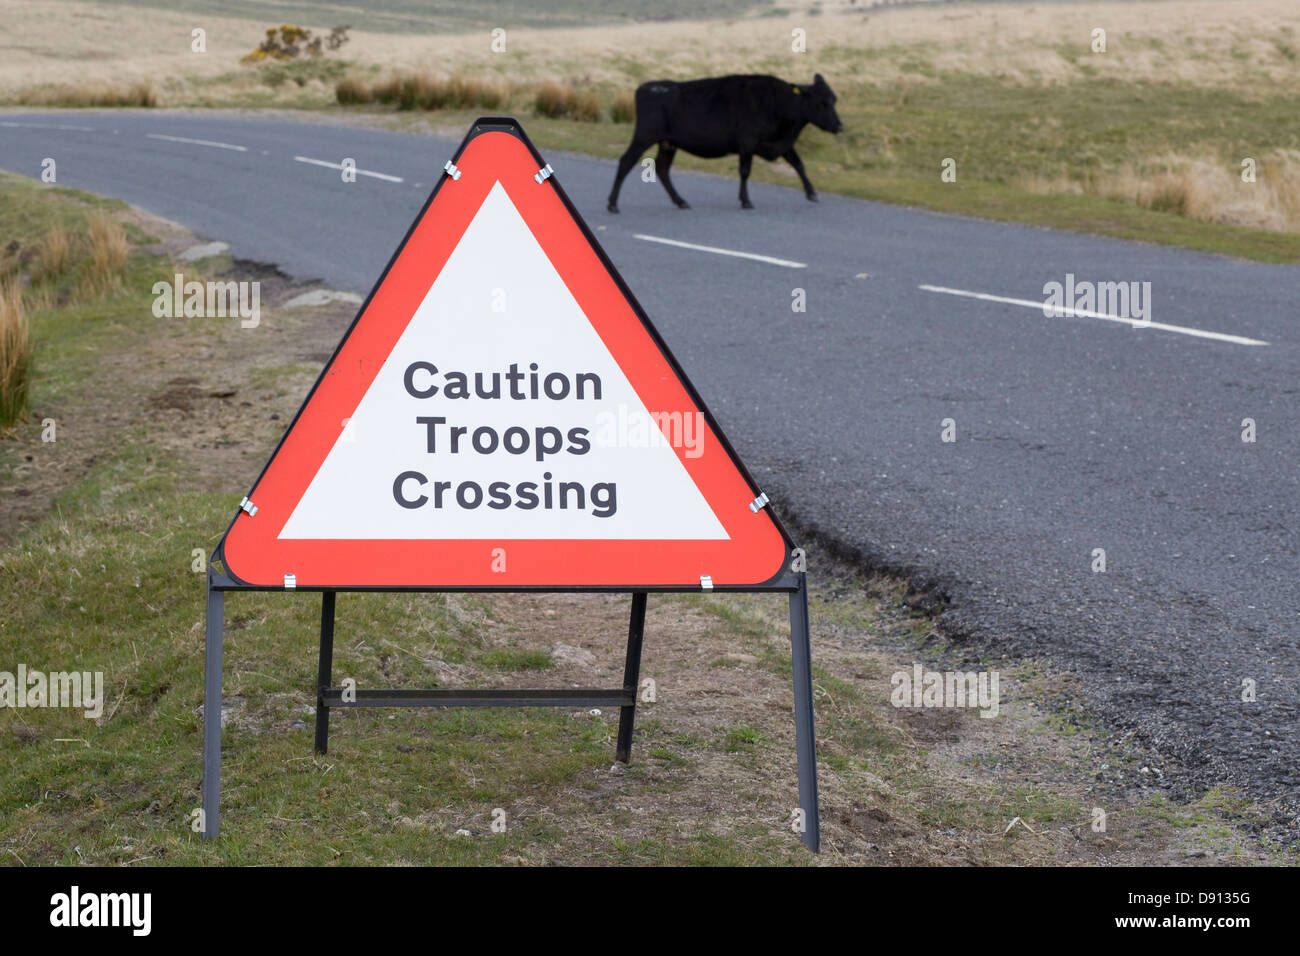 caution troops crossing sign, on a road in Dartmoor National park with a cow on the road Bos primigenius Stock Photo